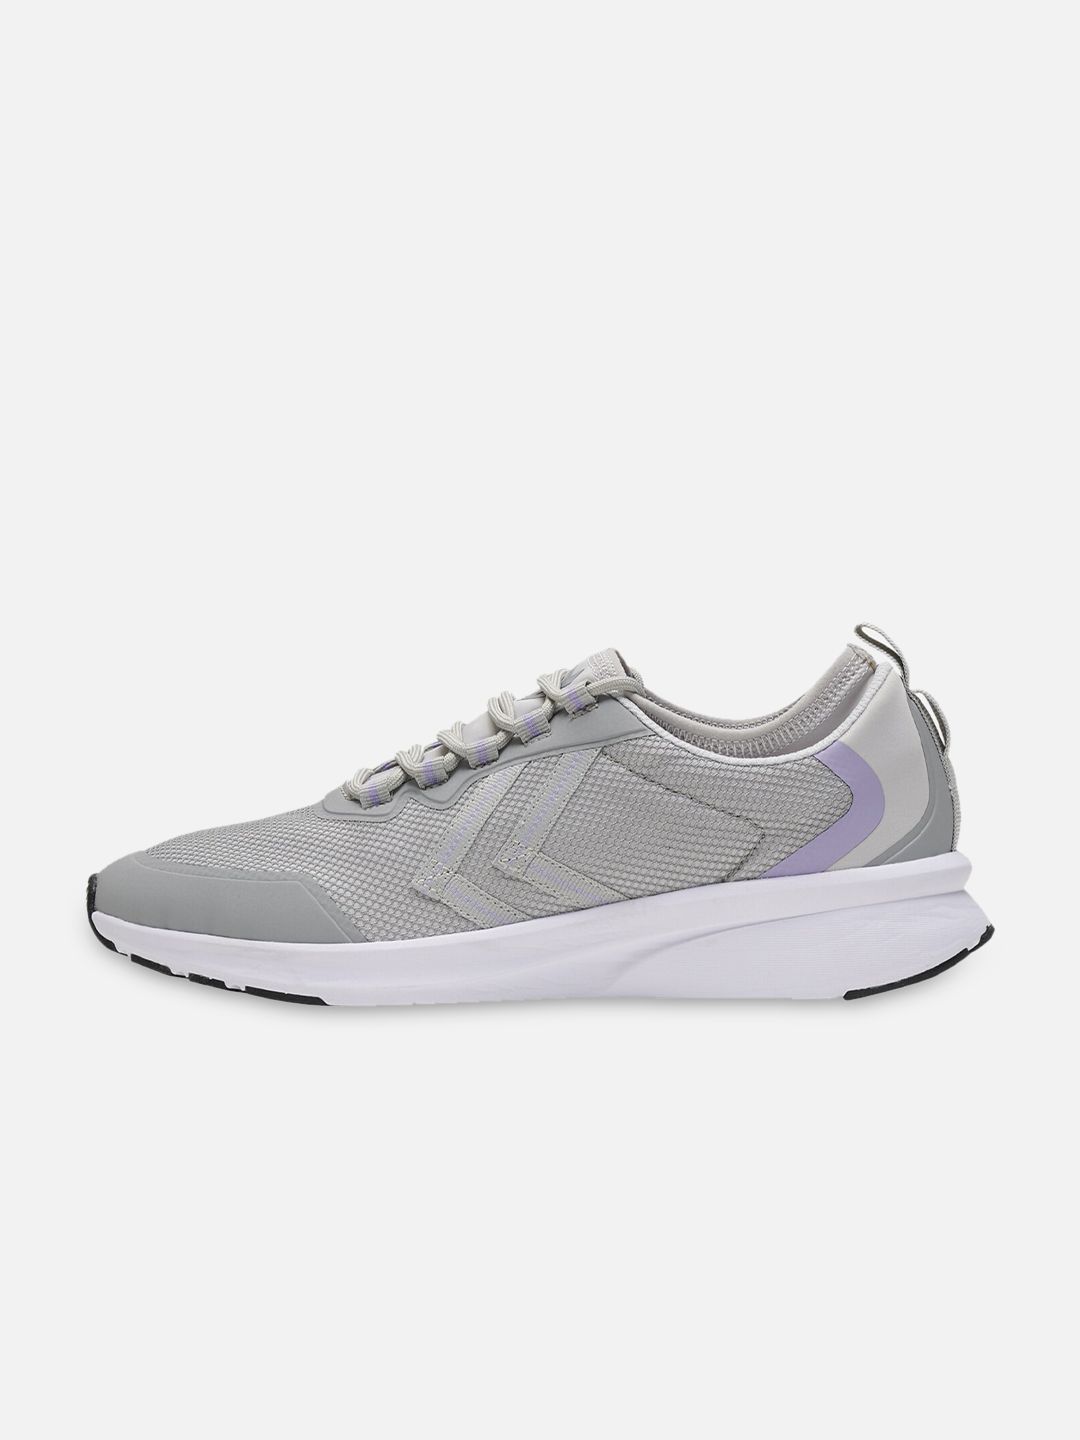 hummel Women Flow Fit Alloy Lunar Rock Training or Gym Shoes Price in India